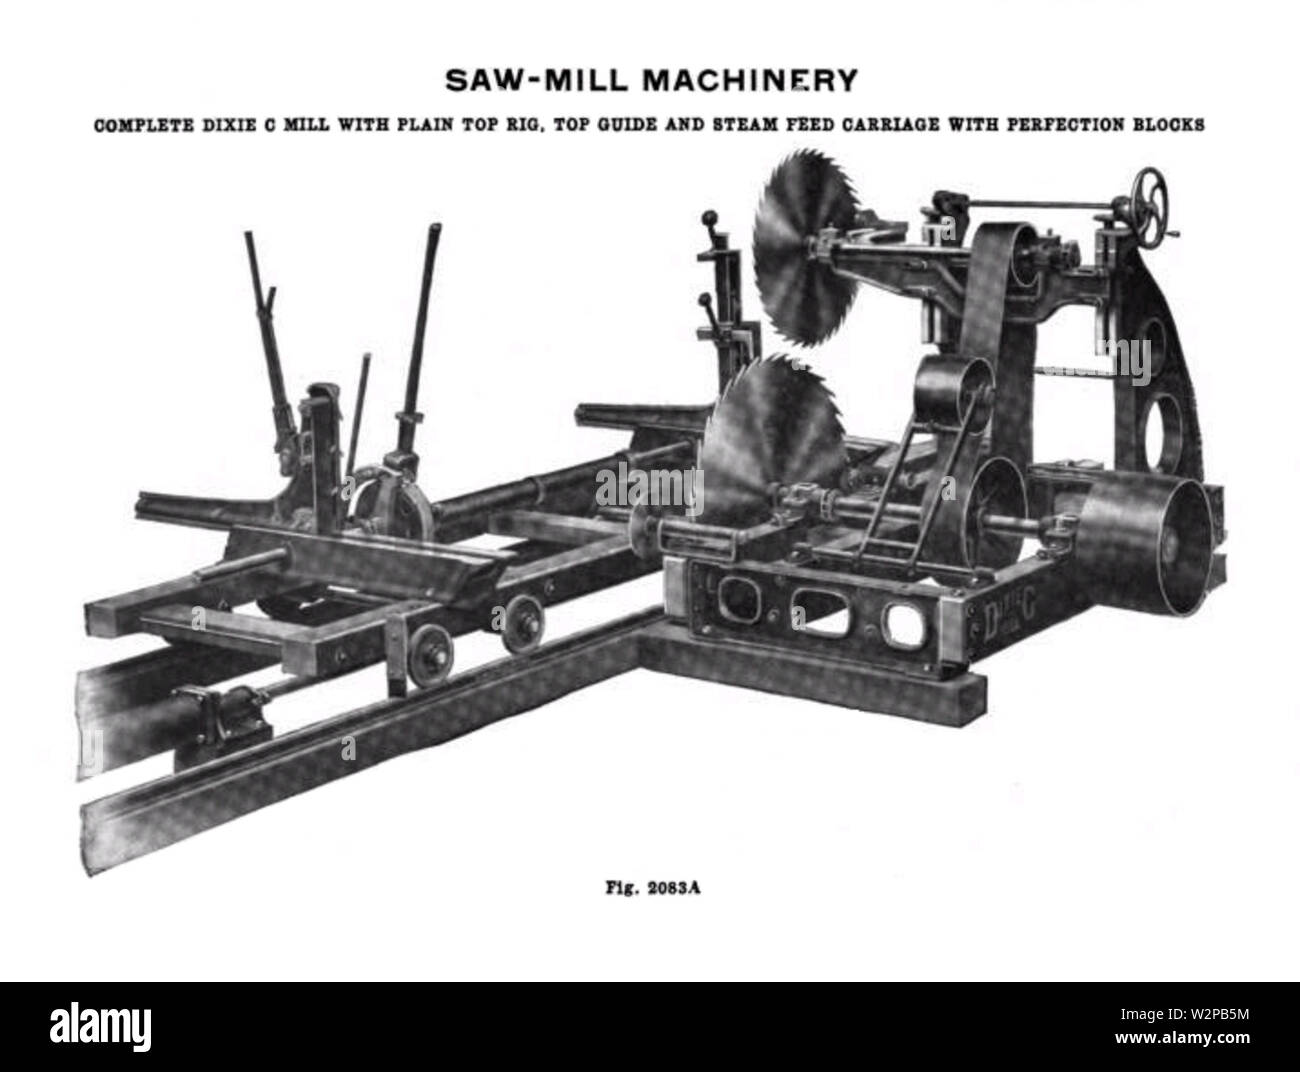 19th century knowledge sawmills and lumber complete dixie c mill Stock Photo